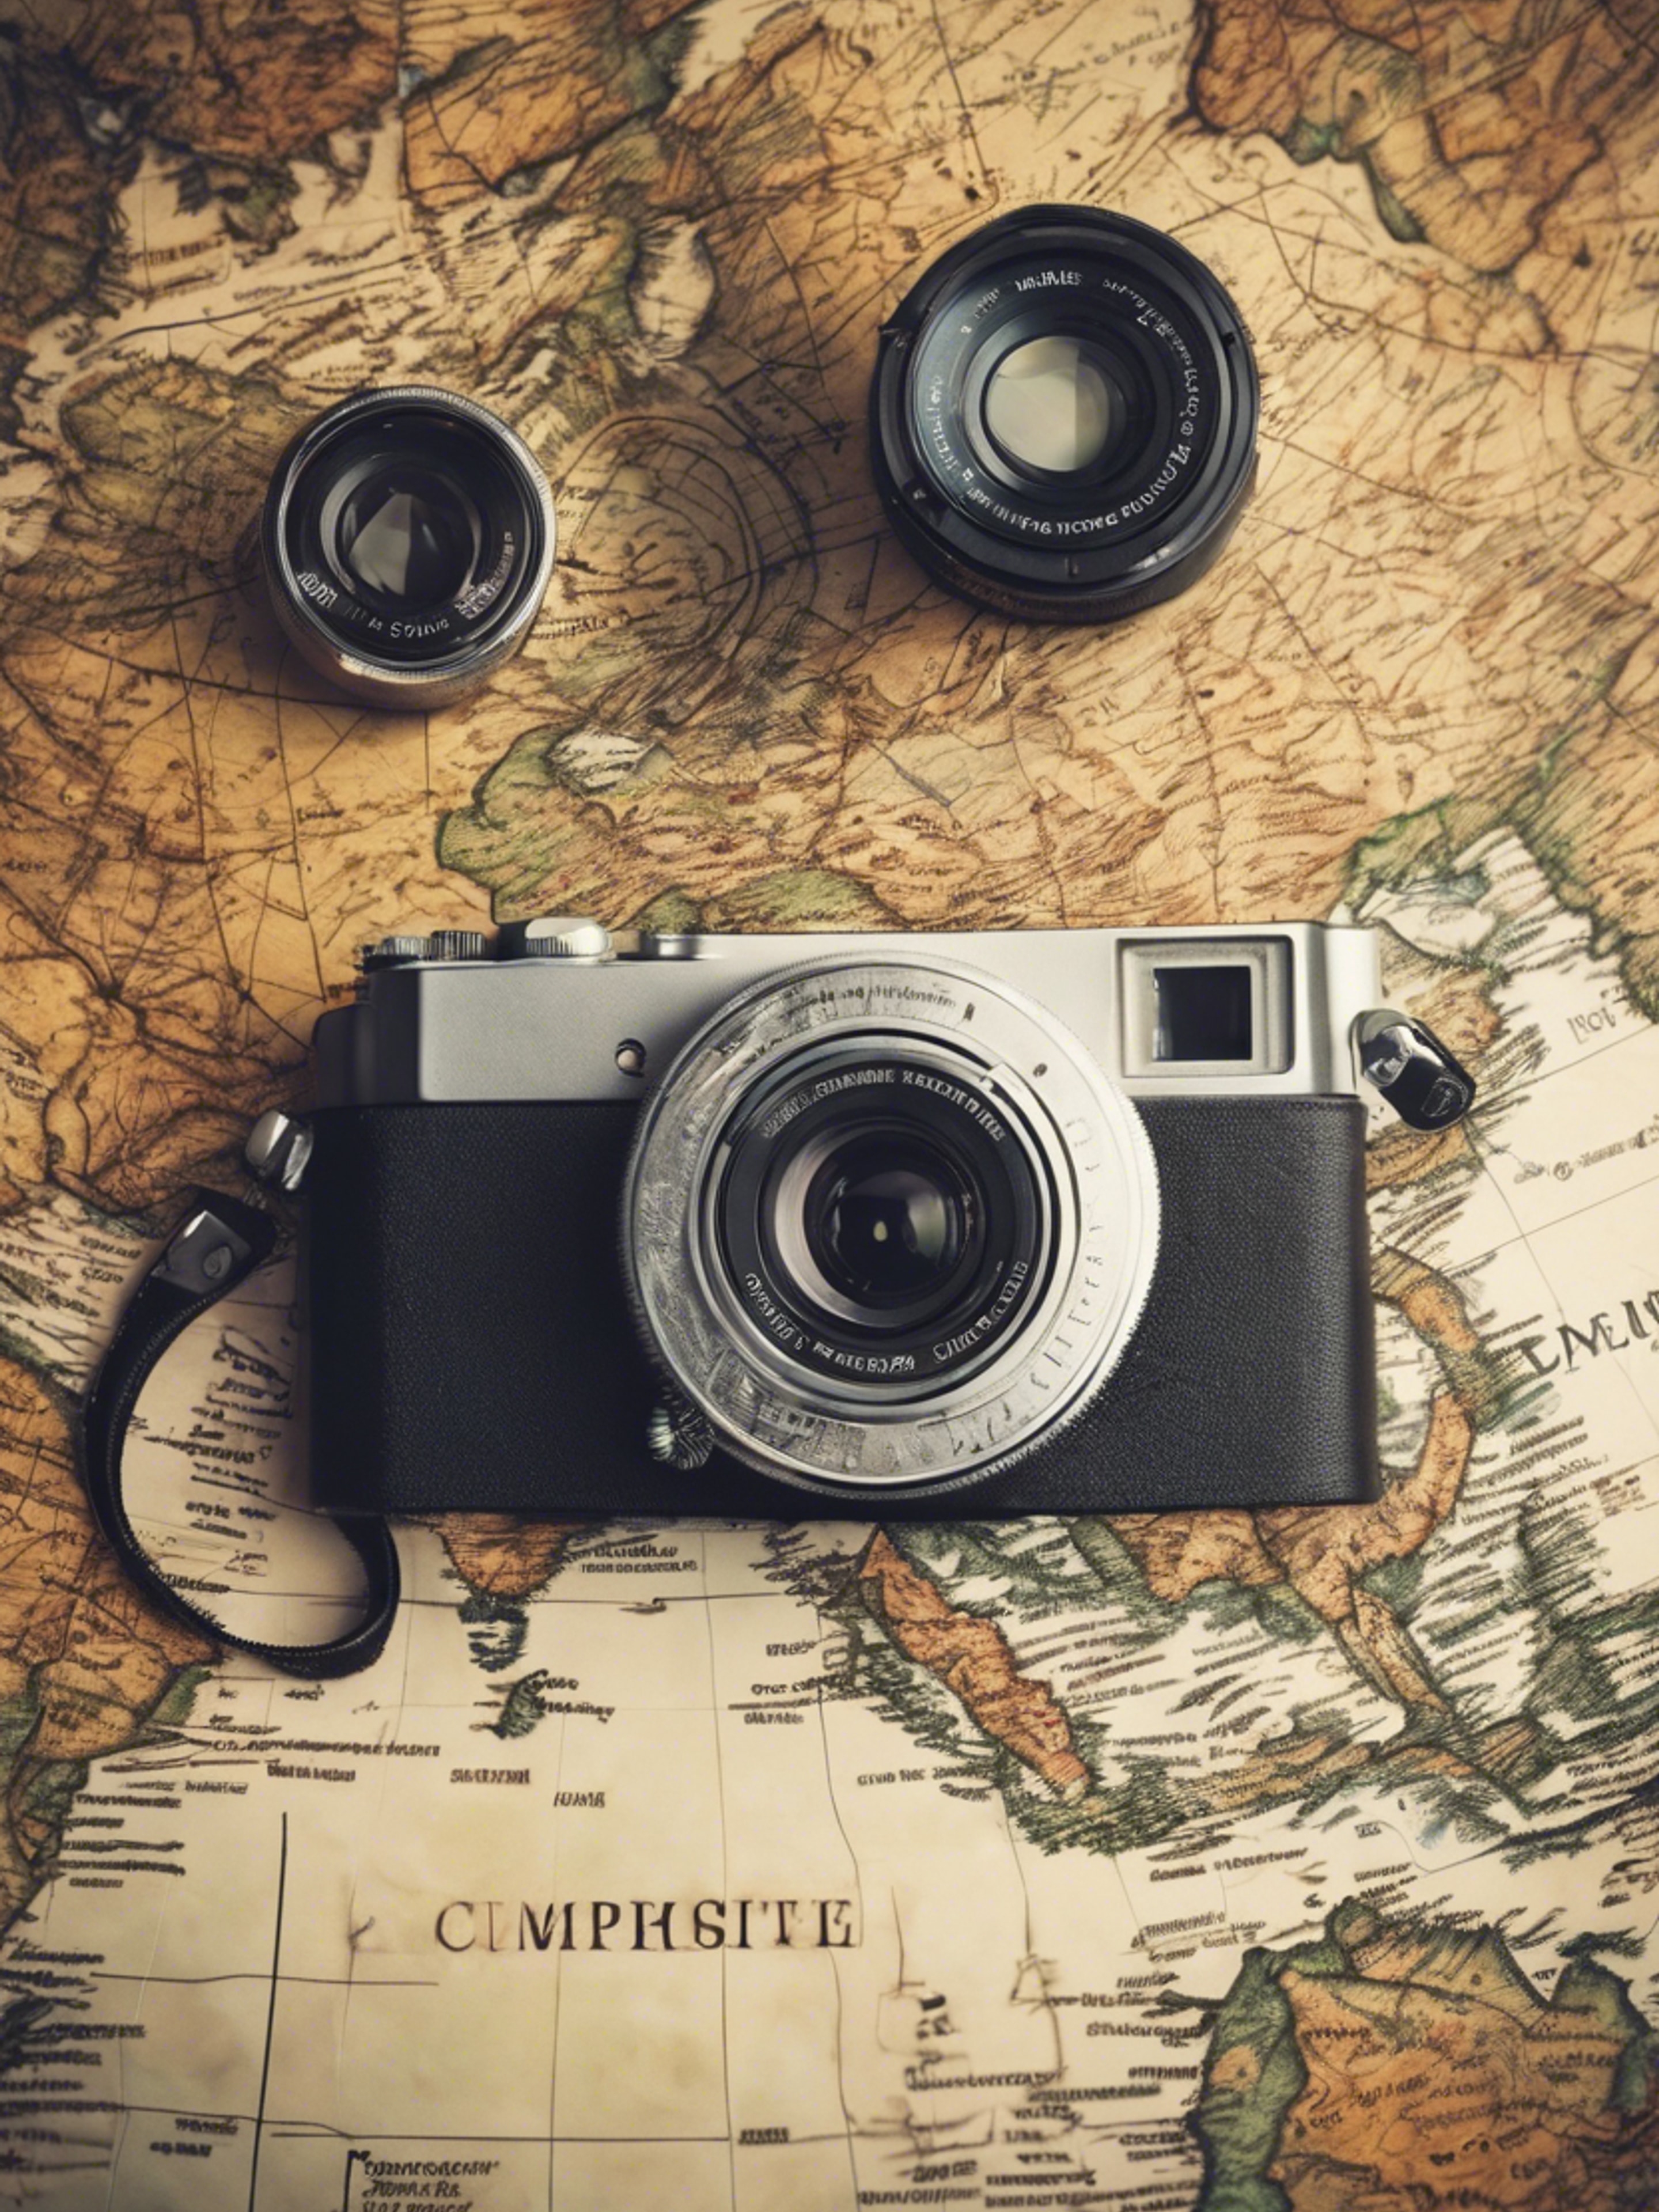 A compact camera with vintage design, placed on a world map to convey the spirit of travel. Tapeta[89e32525bdc346769ef4]